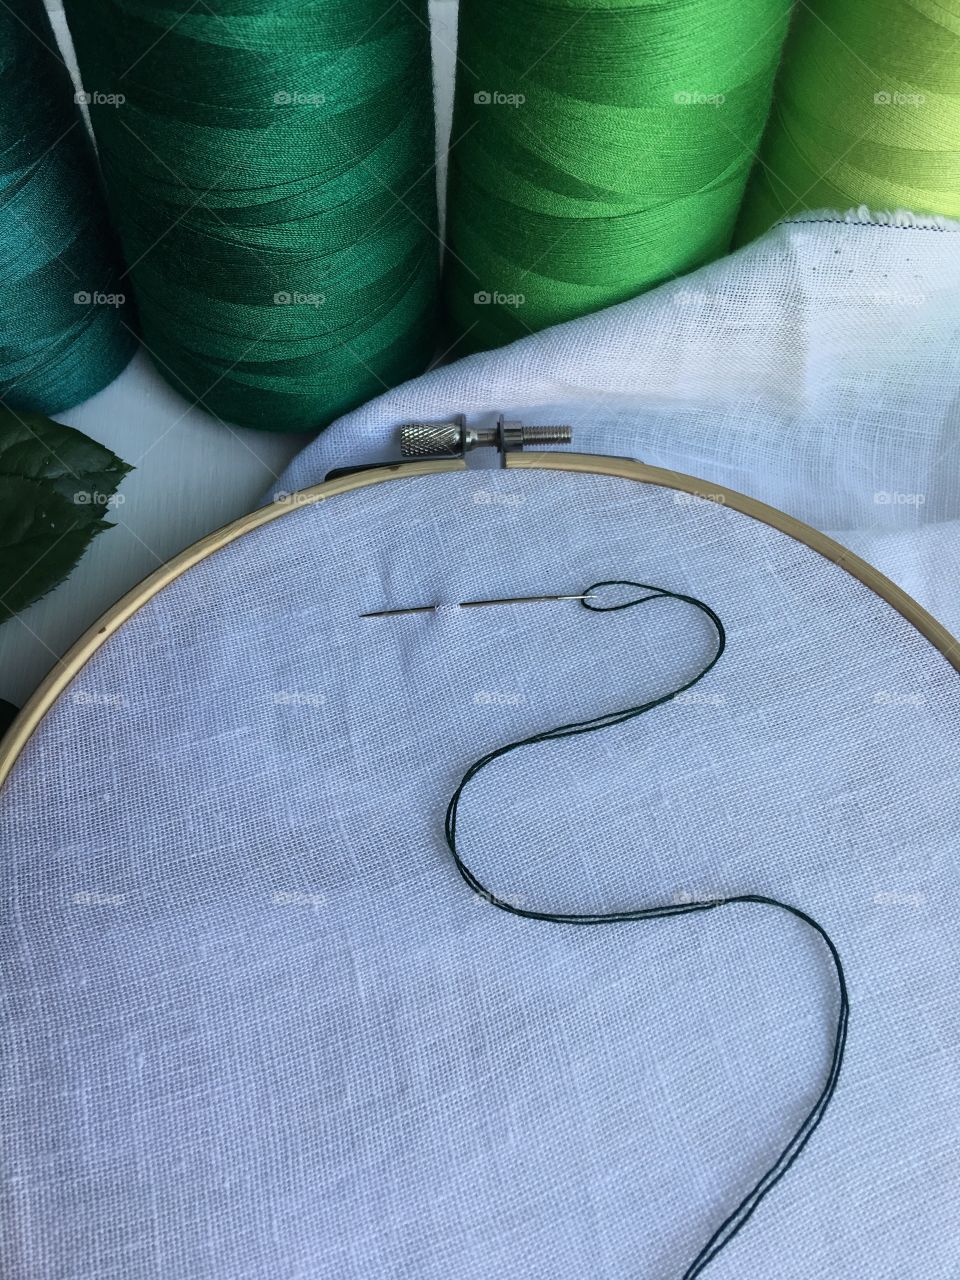 green thread in the bobbin and wooden hoop for sewing and embroidery